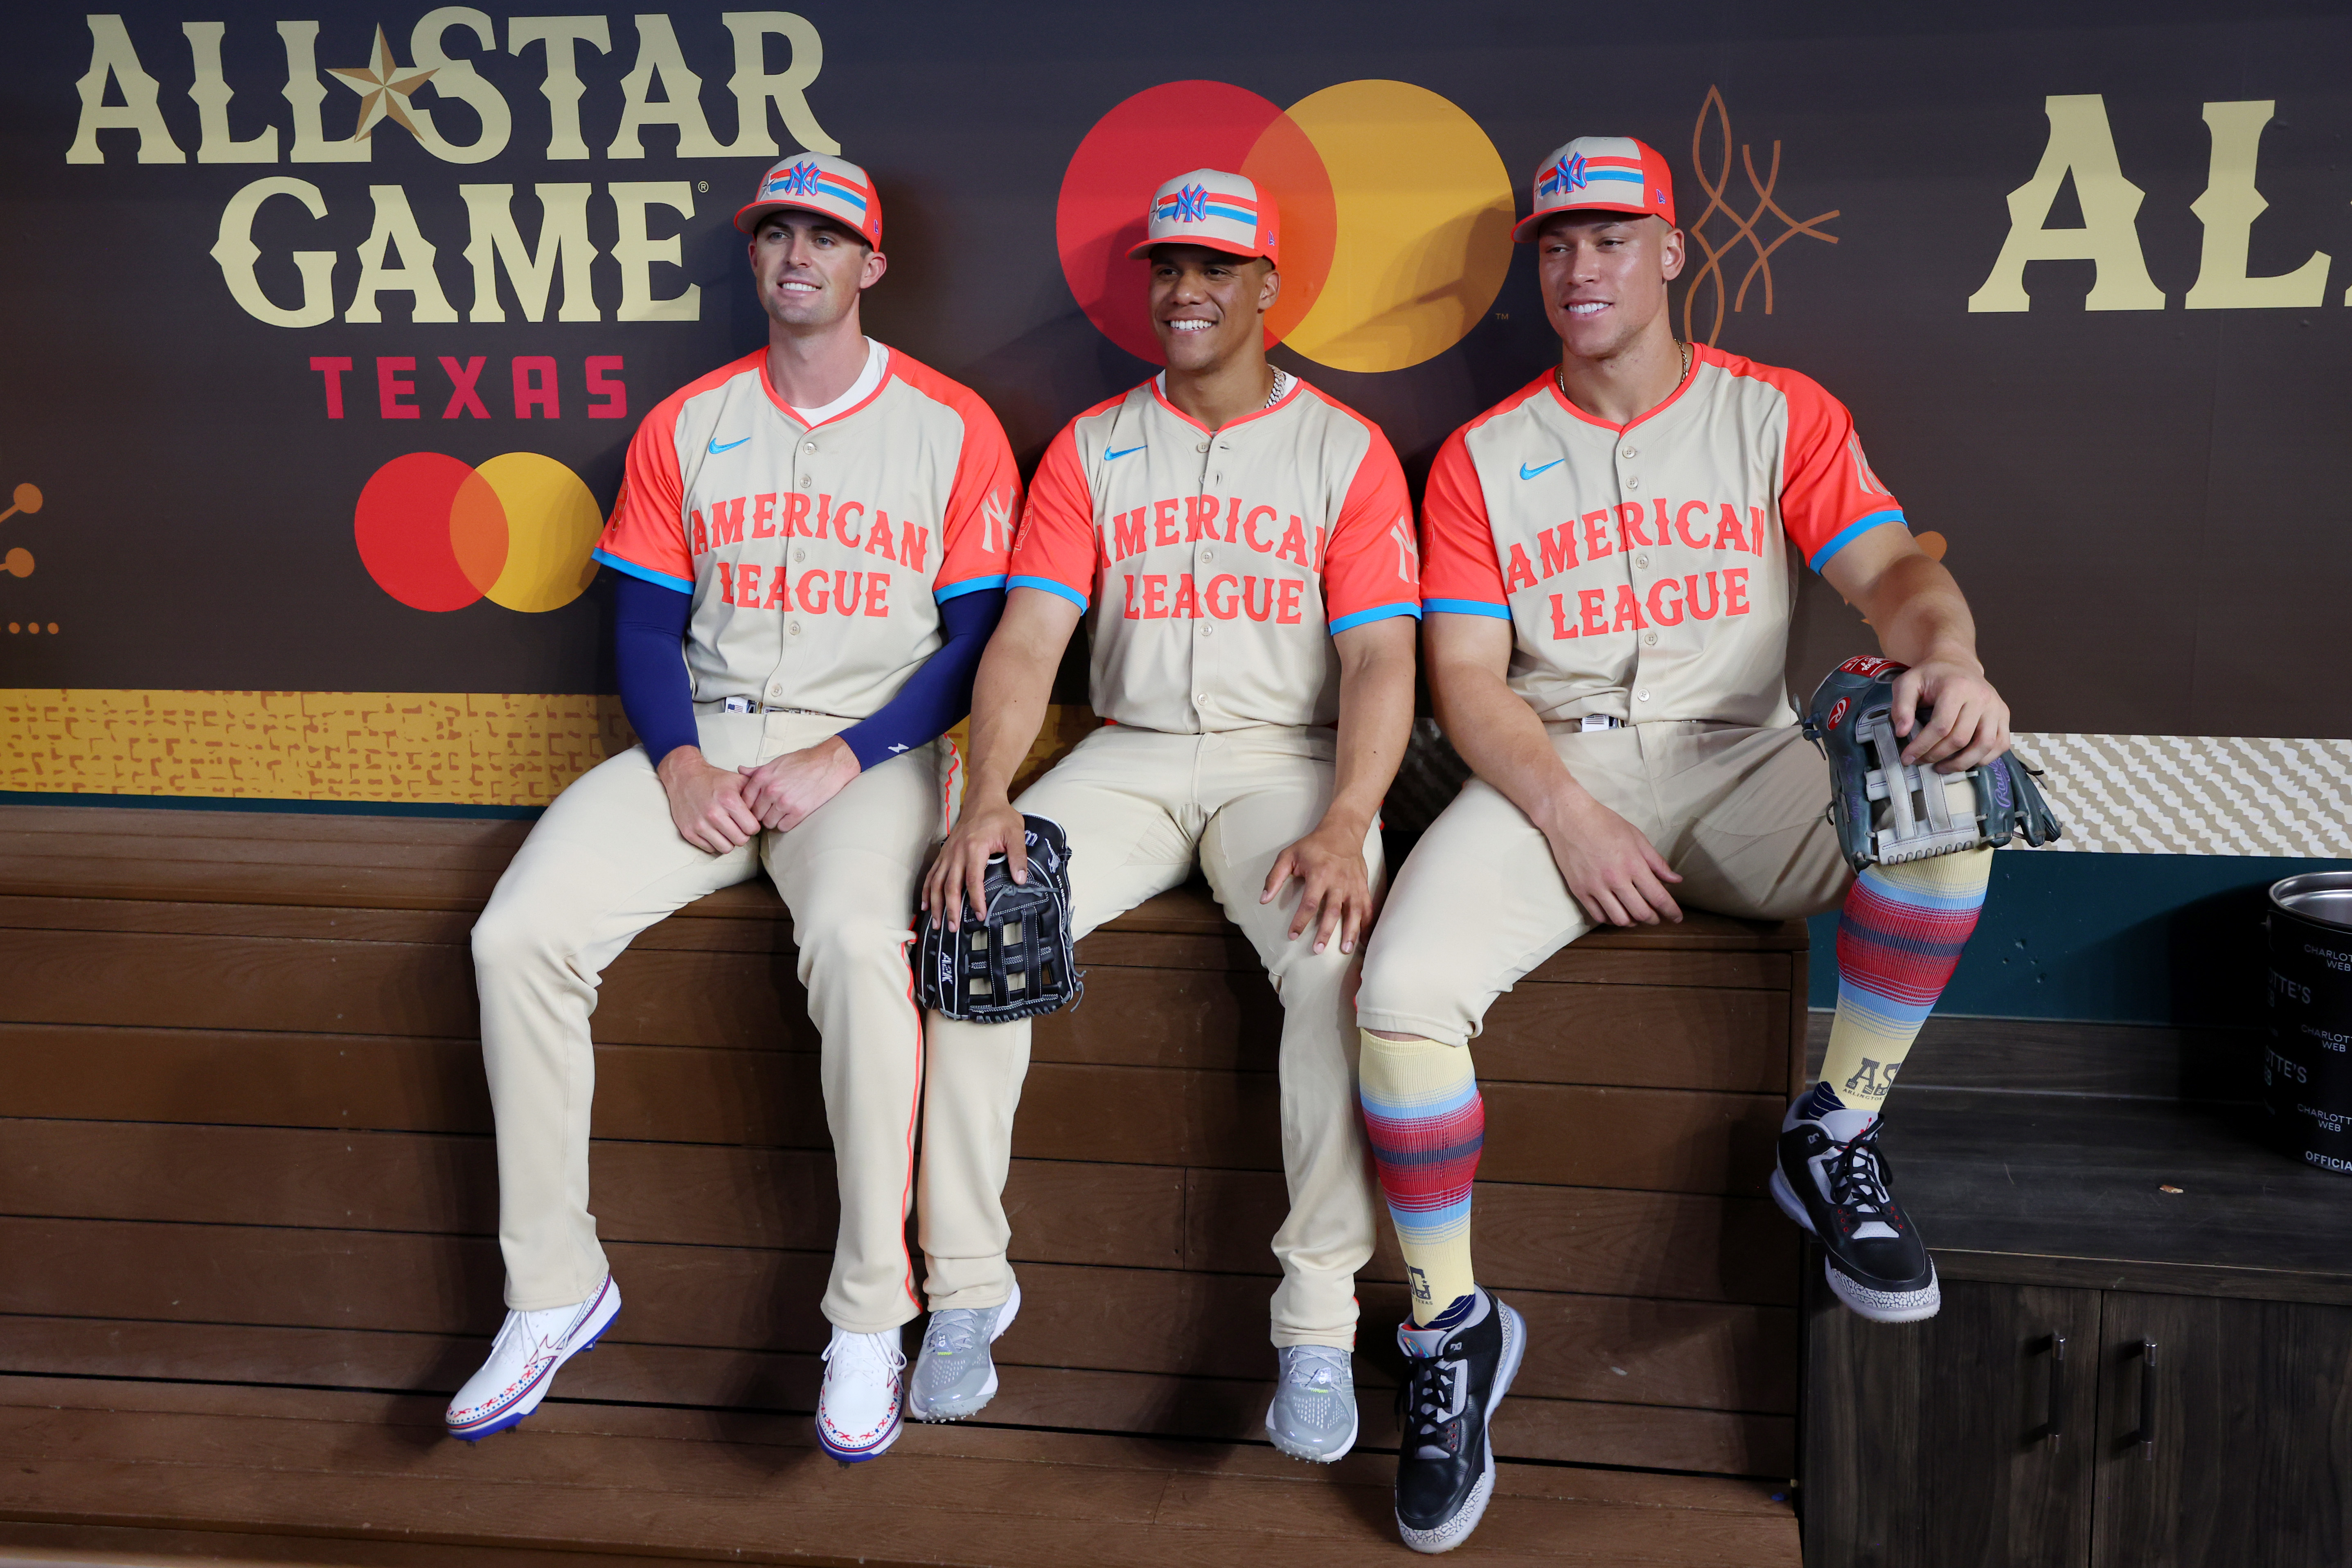 94th MLB All-Star Game presented by Mastercard